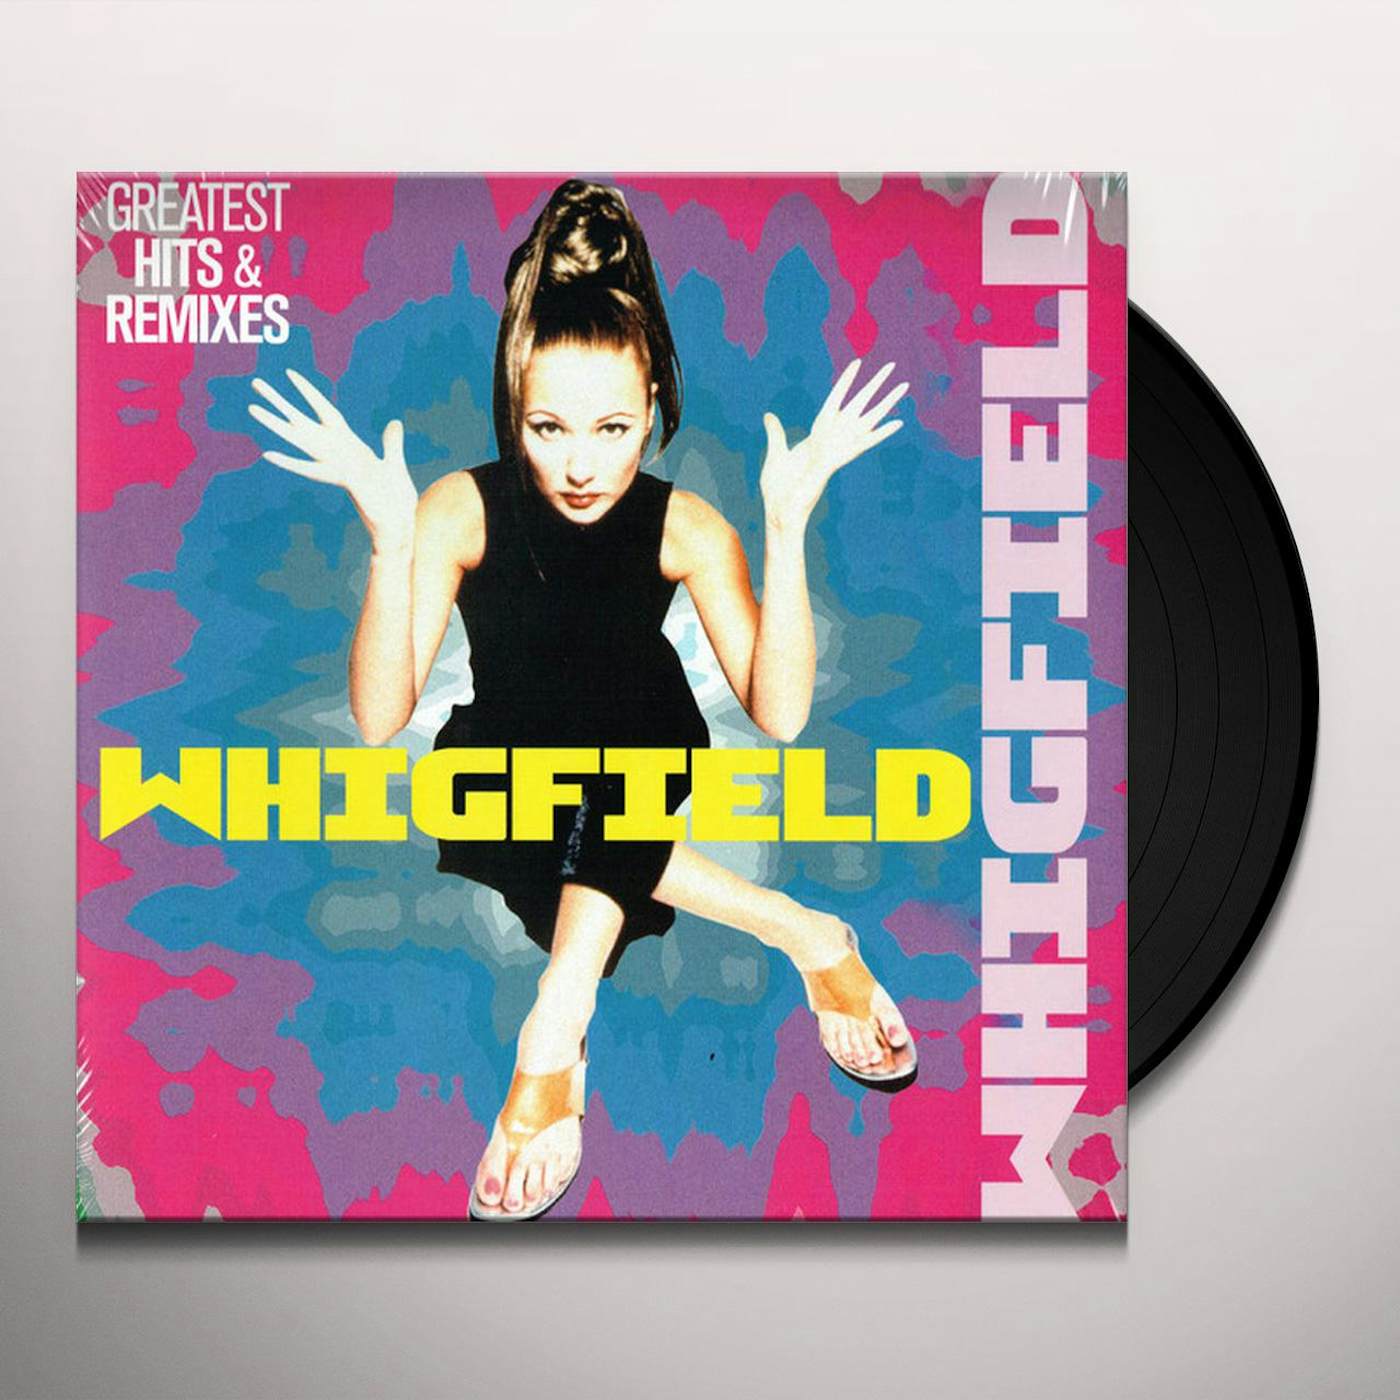 Whigfield GREATEST HITS & REMIXES Vinyl Record